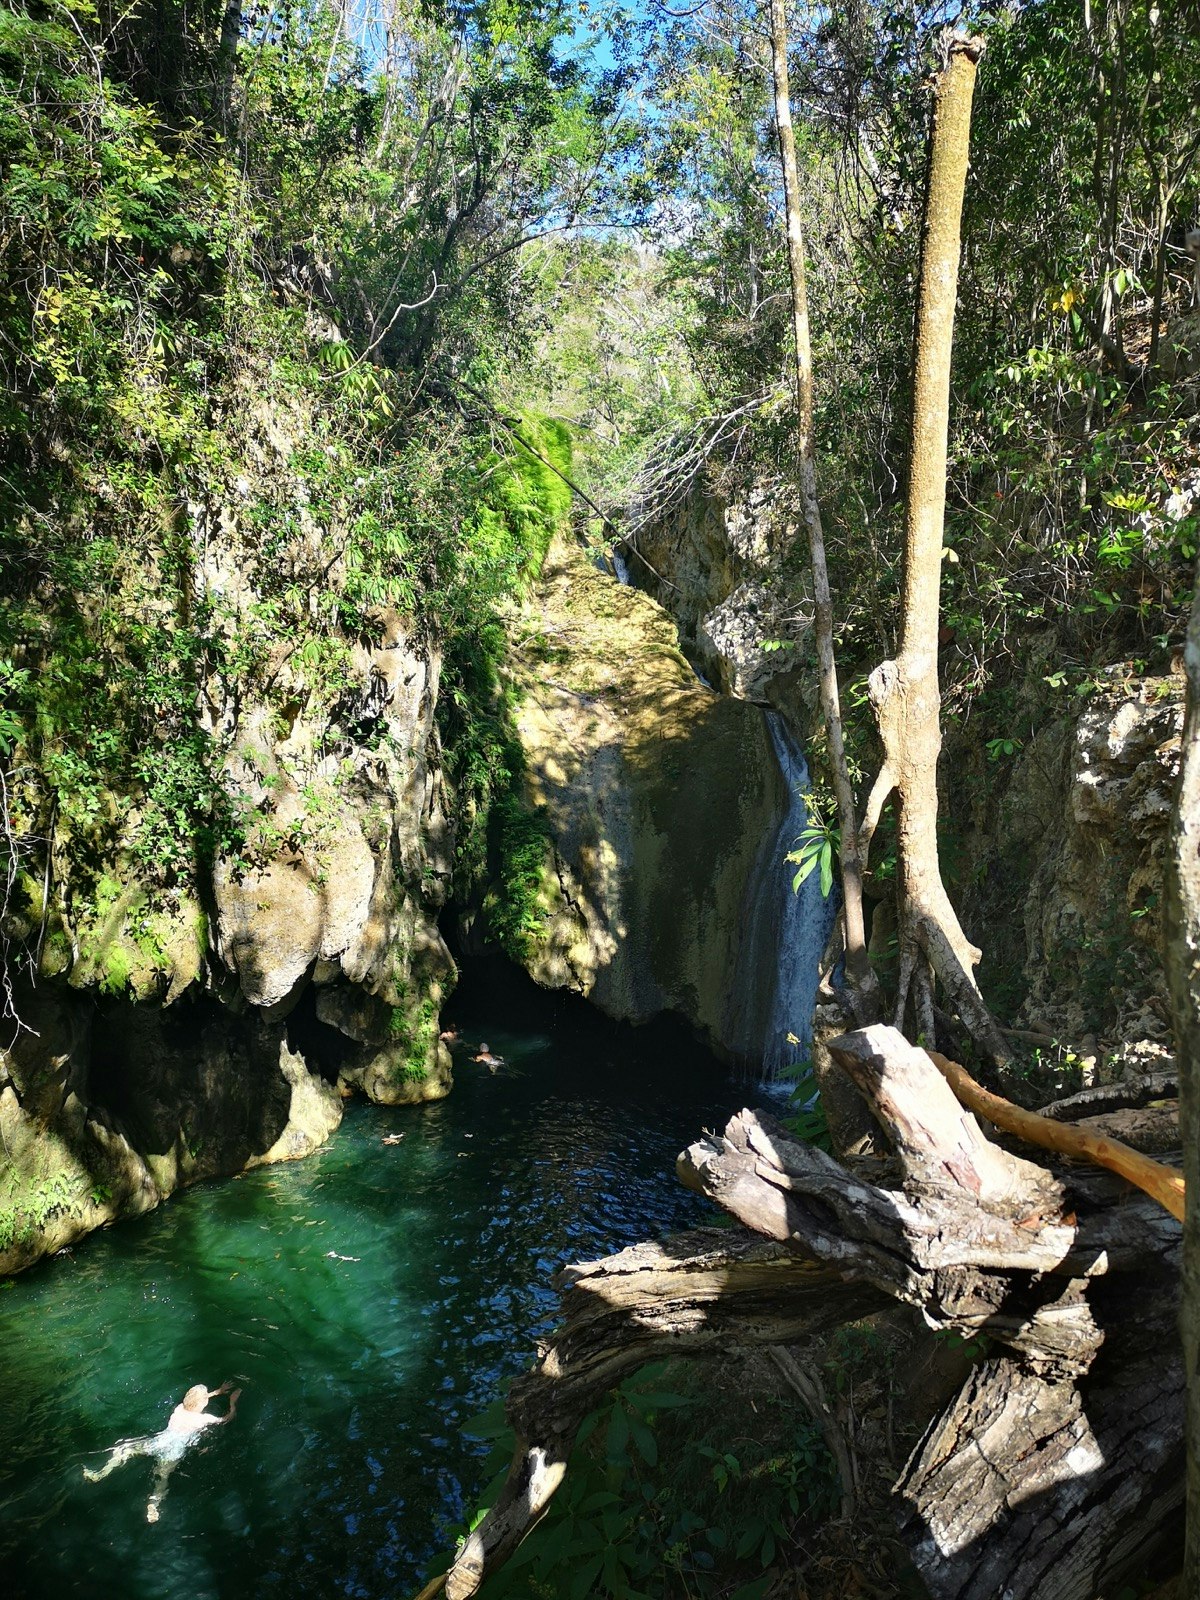 A person swims in the water hole near Javira waterfall 